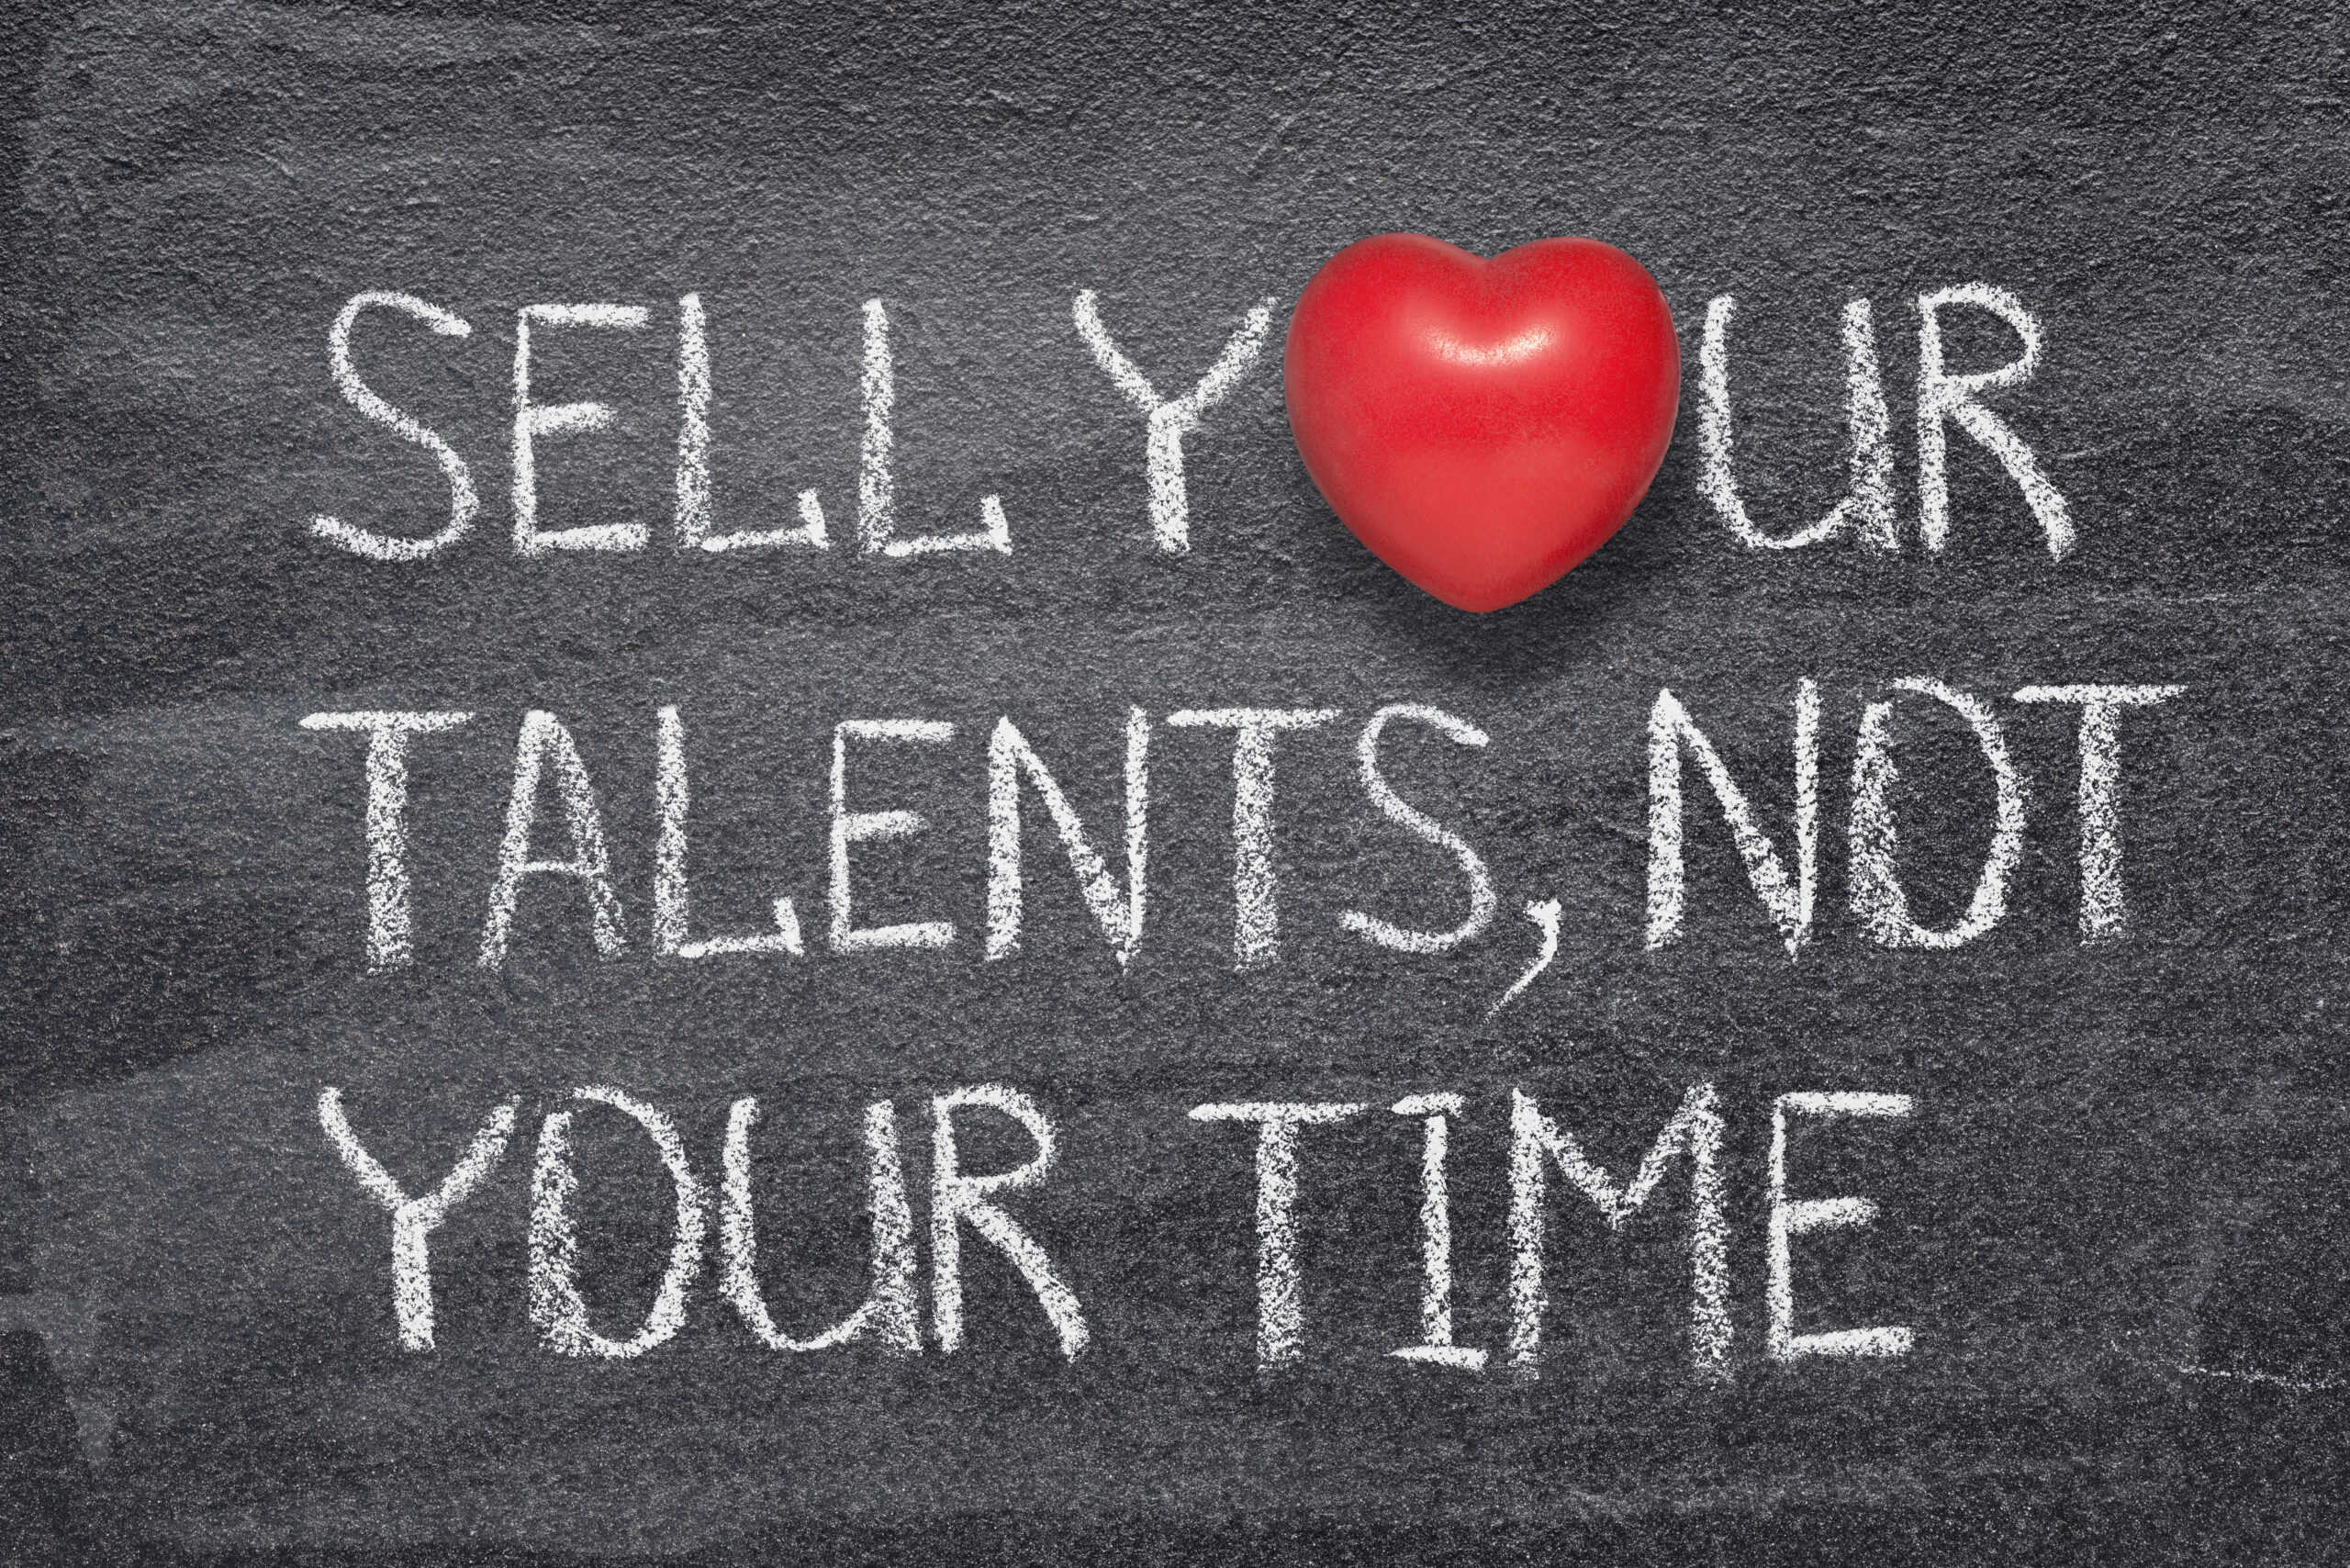 sell your talents, not your time